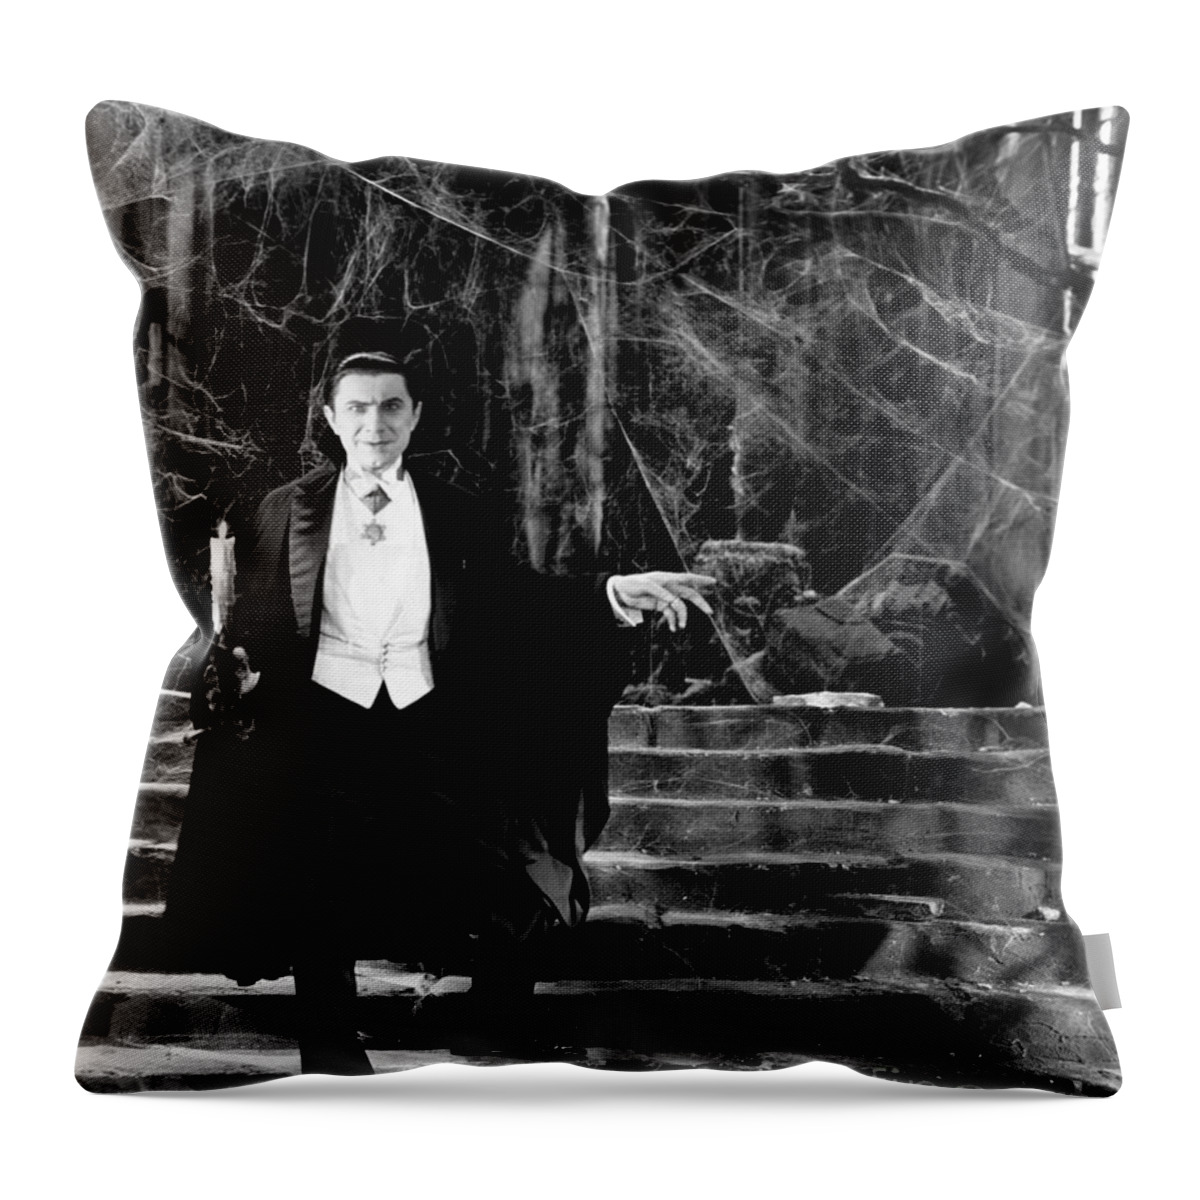 Dracula Throw Pillow featuring the photograph Dracula by Vintage Collectables